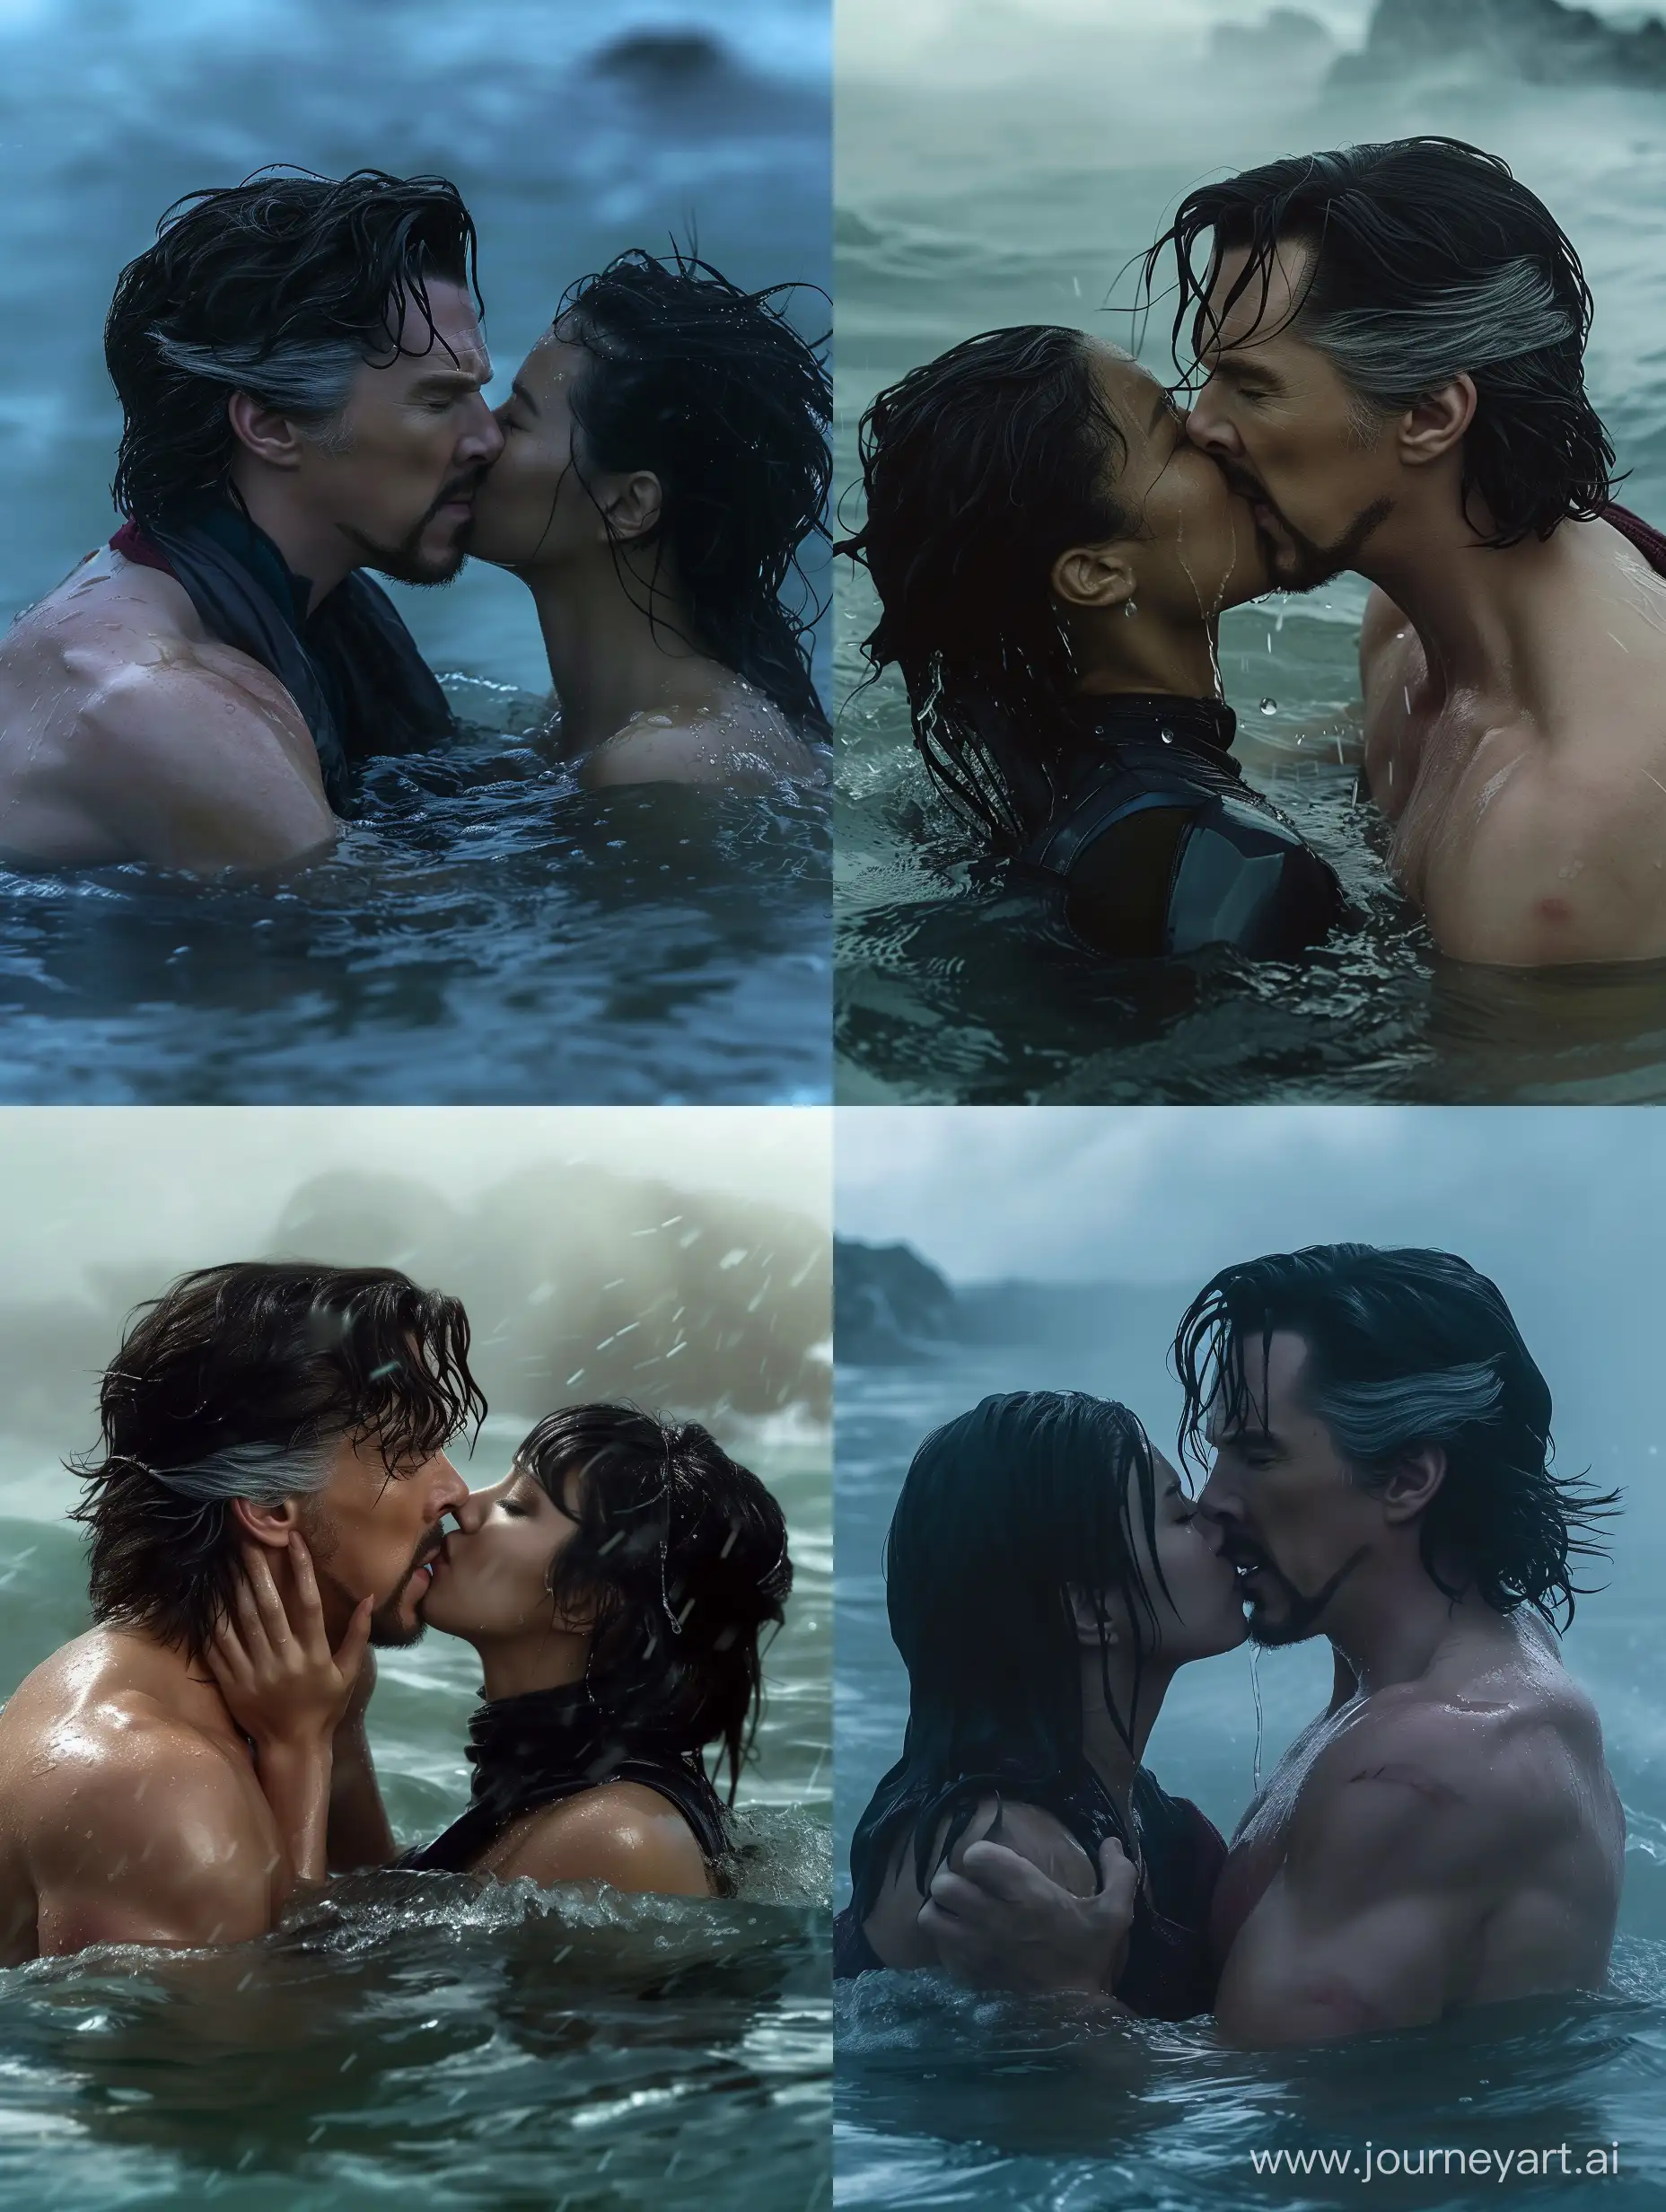 Doctor Strange with shoulder-length hair, shirtless, wet, kissing a woman with black hair, in the ocean